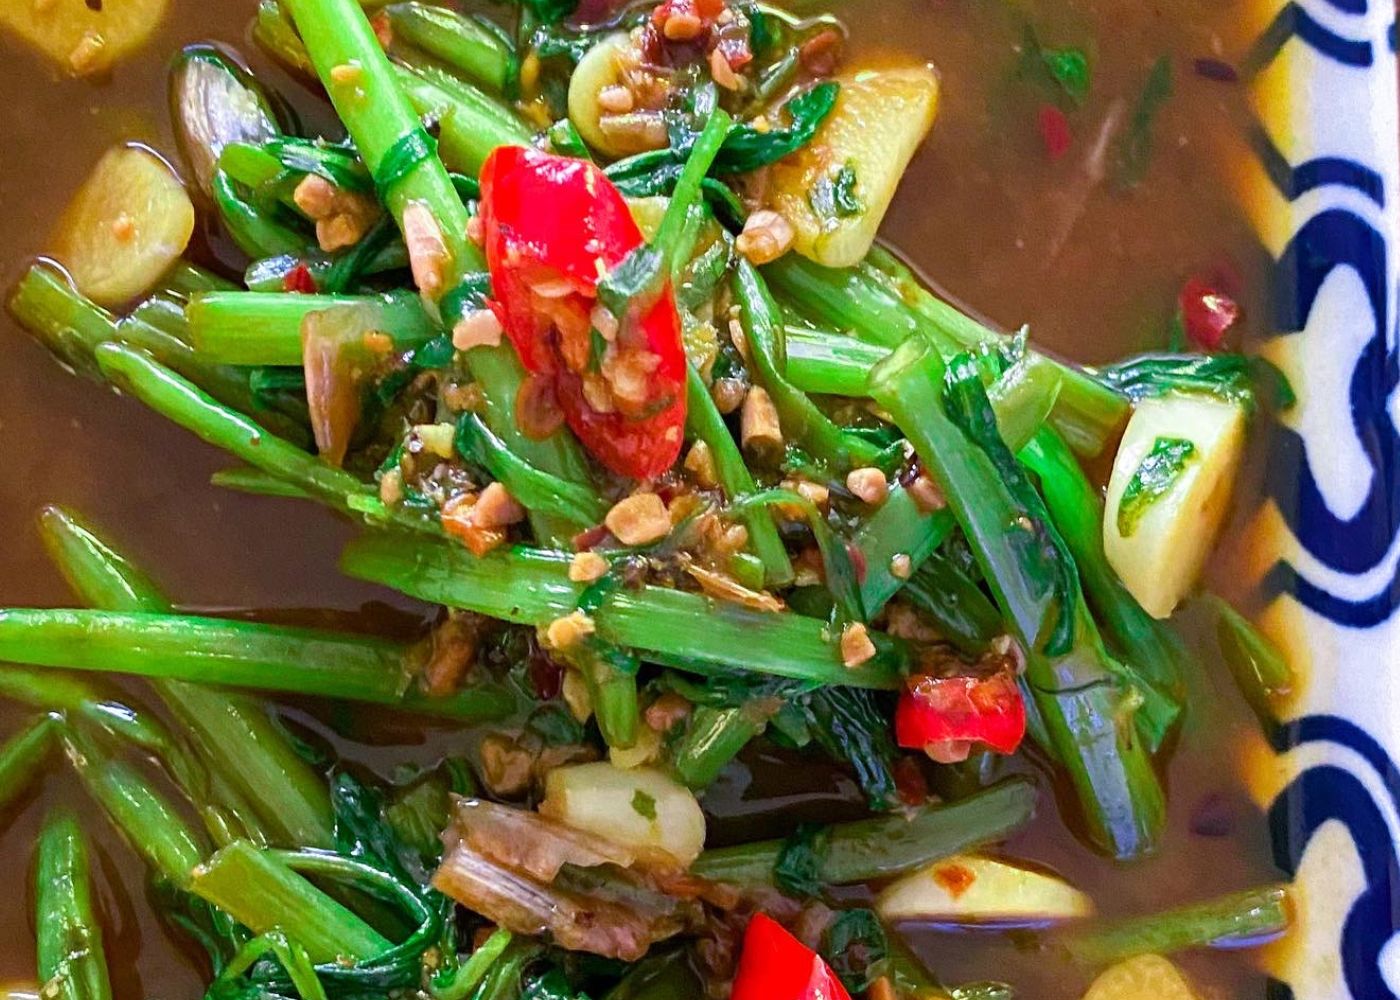 15 Minute Veg Meals: Spicy Water Spinach Stir-Fry